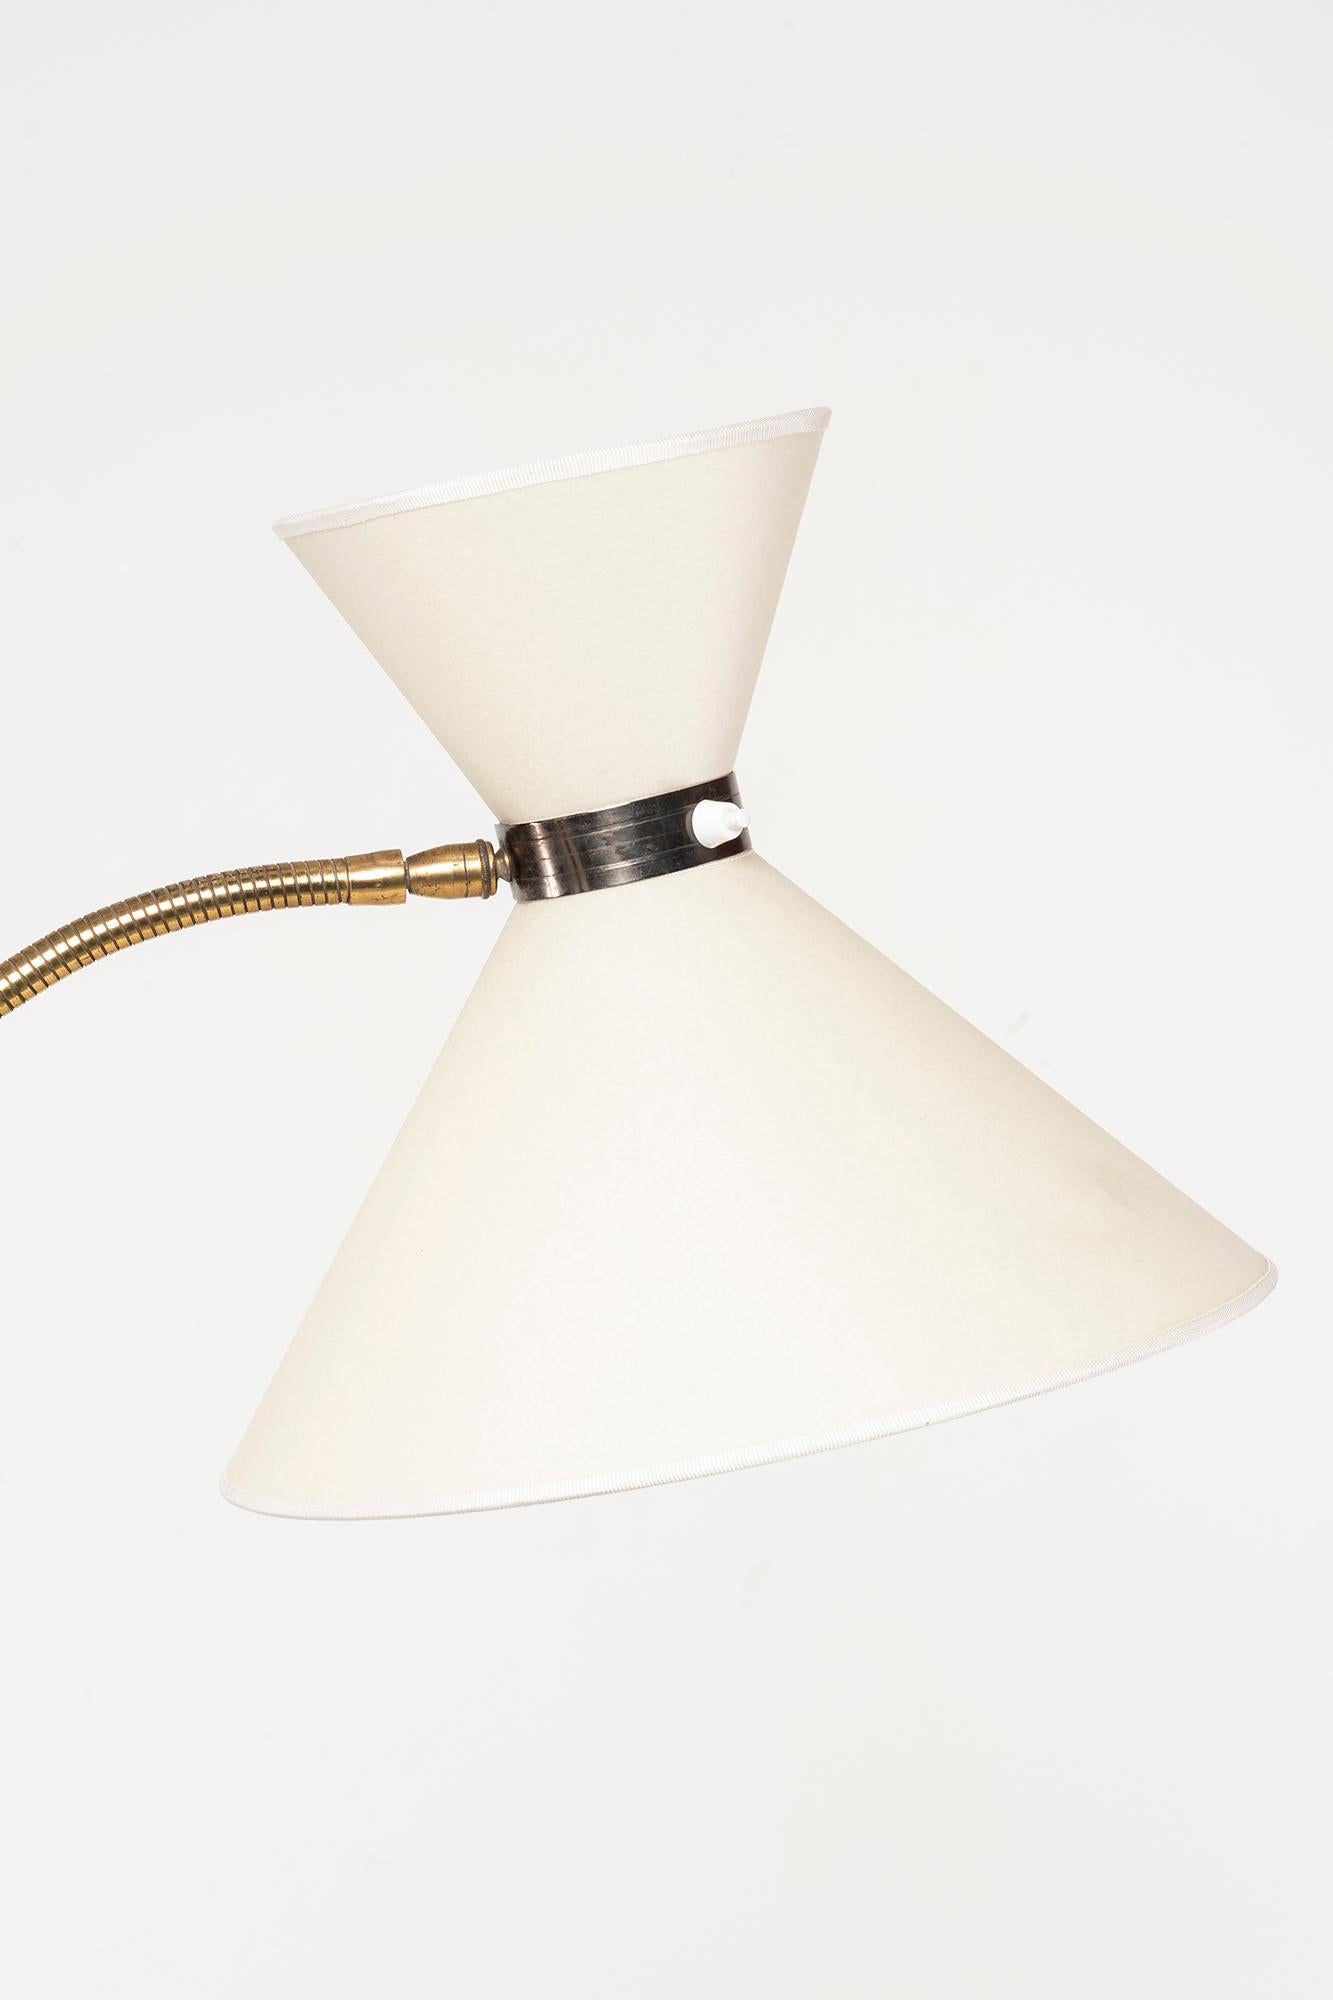 France, 1955
Brass stand and base, partially refined in dark grey, parchment lampshade.